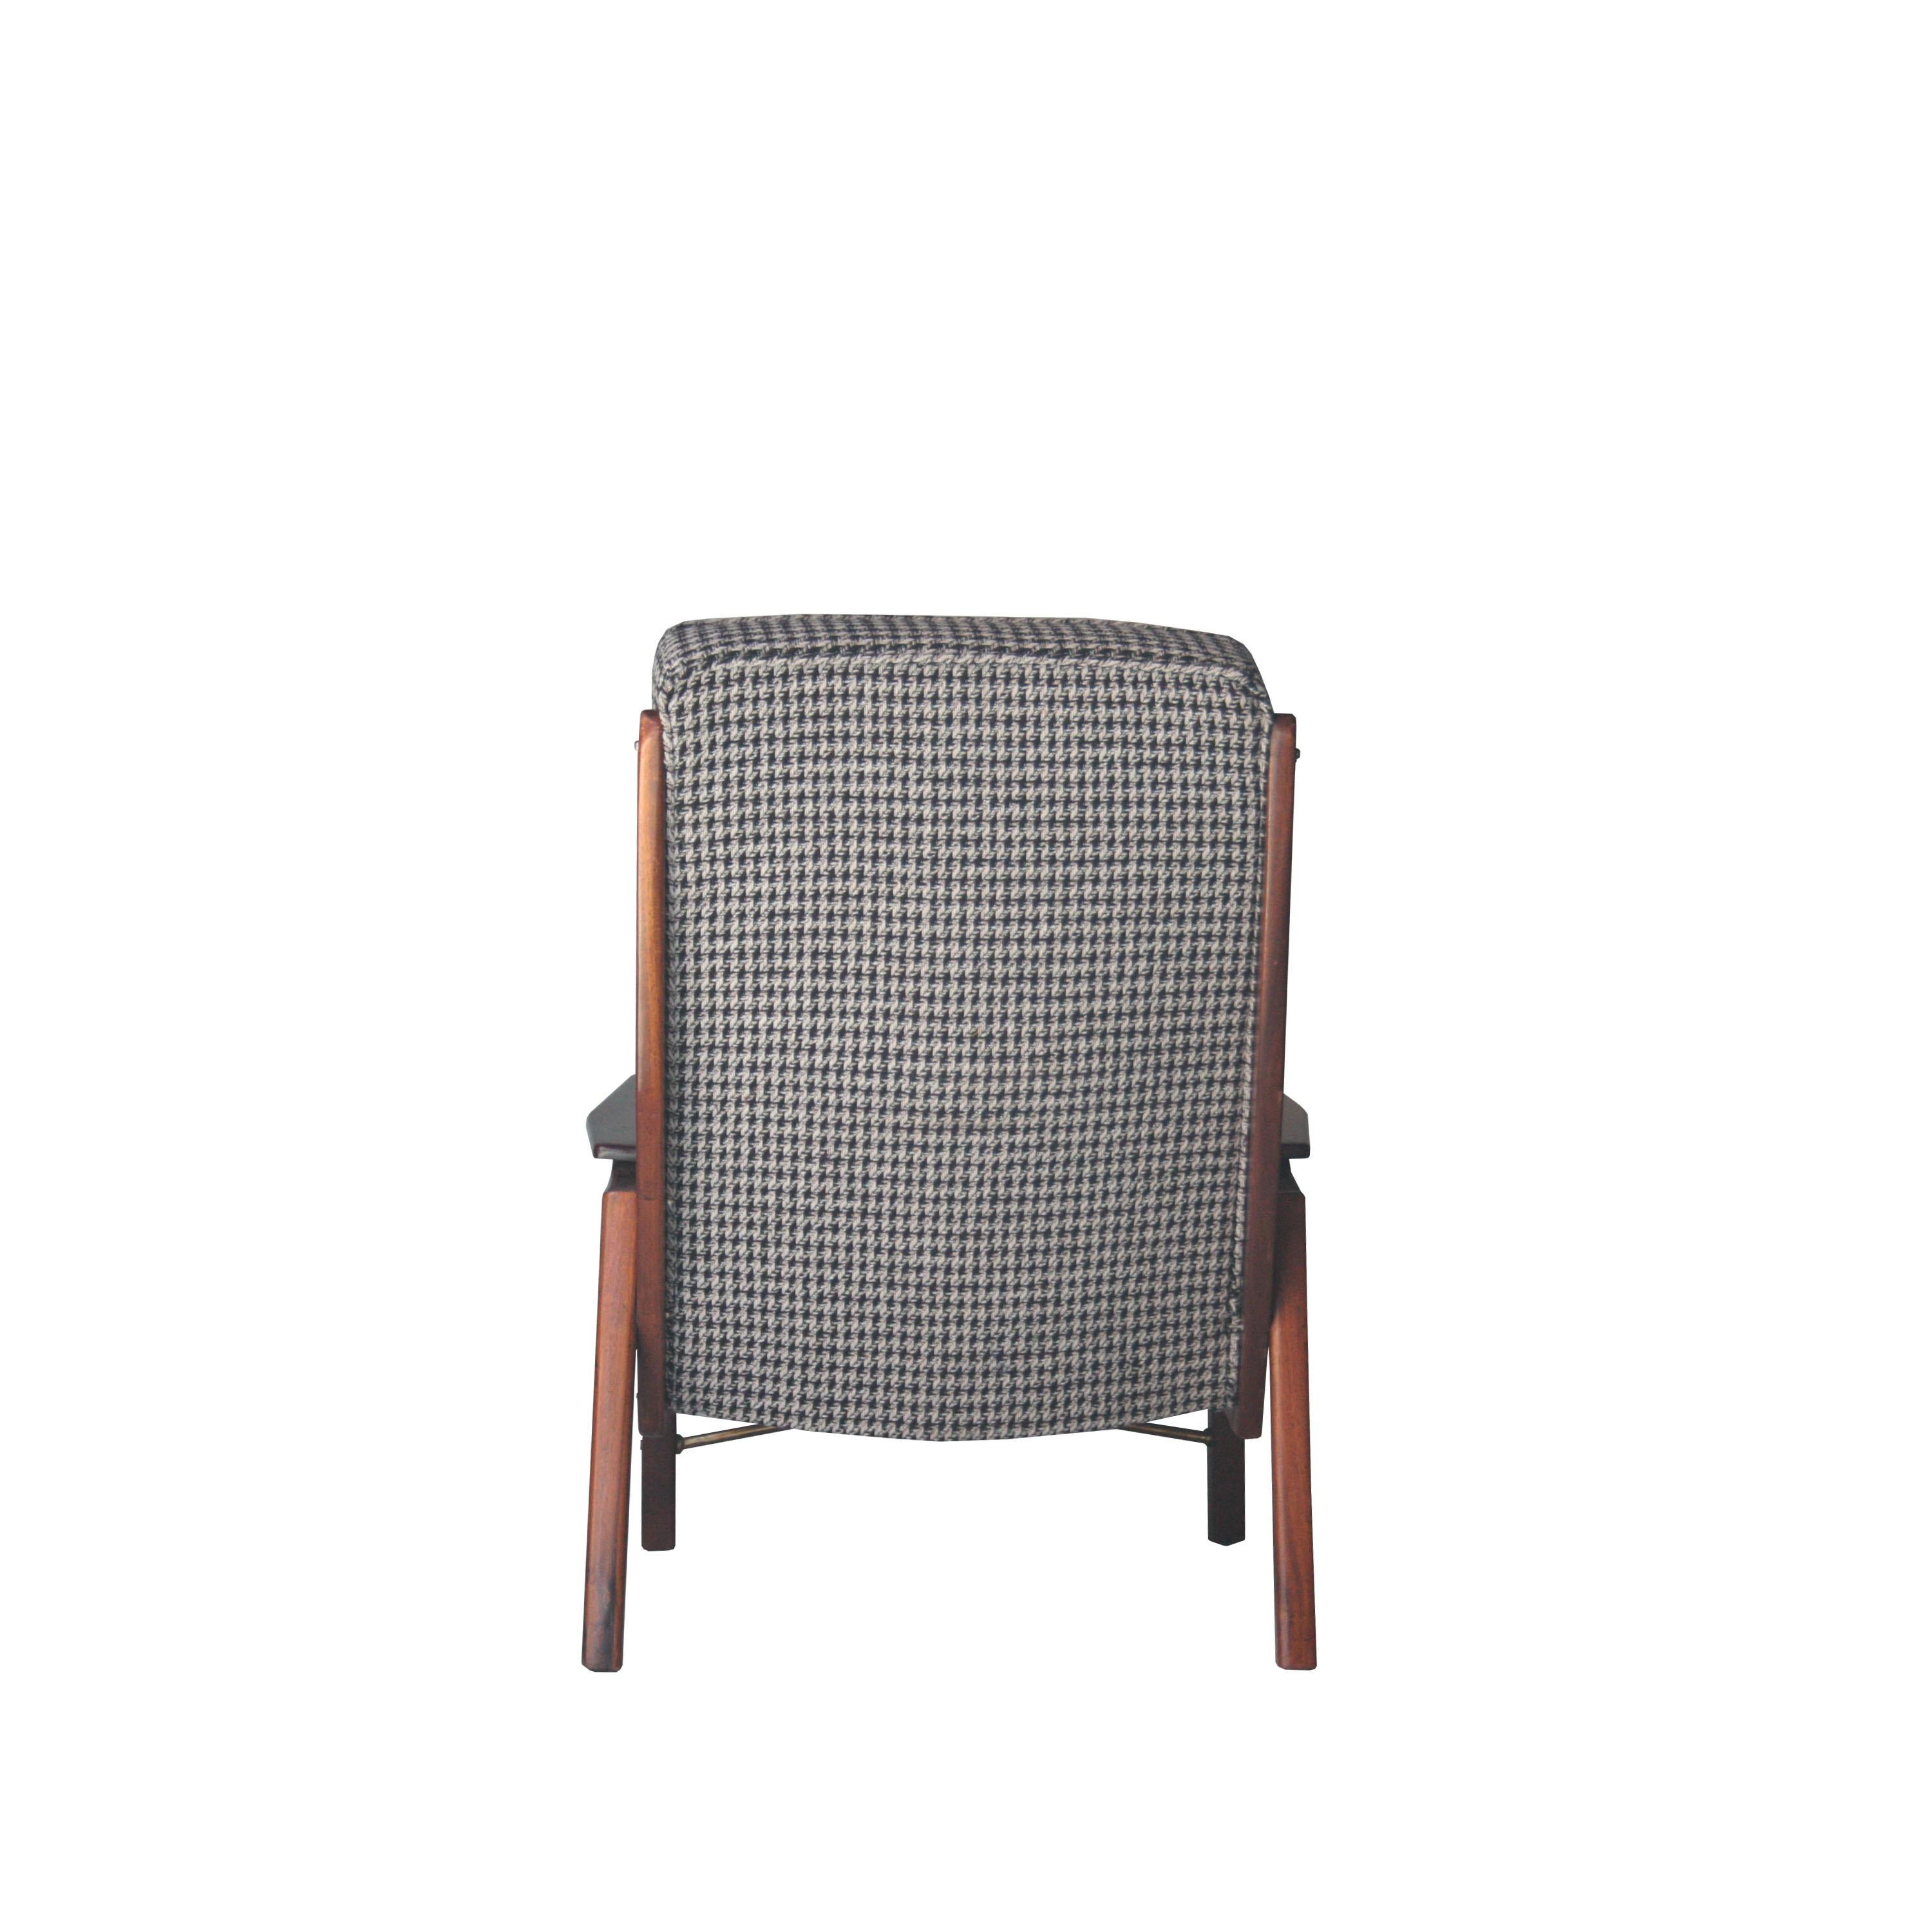 Mid-Century Modern Armchair Designed by René-Jean Caillette, 'Airborne Model' France, 1956 For Sale